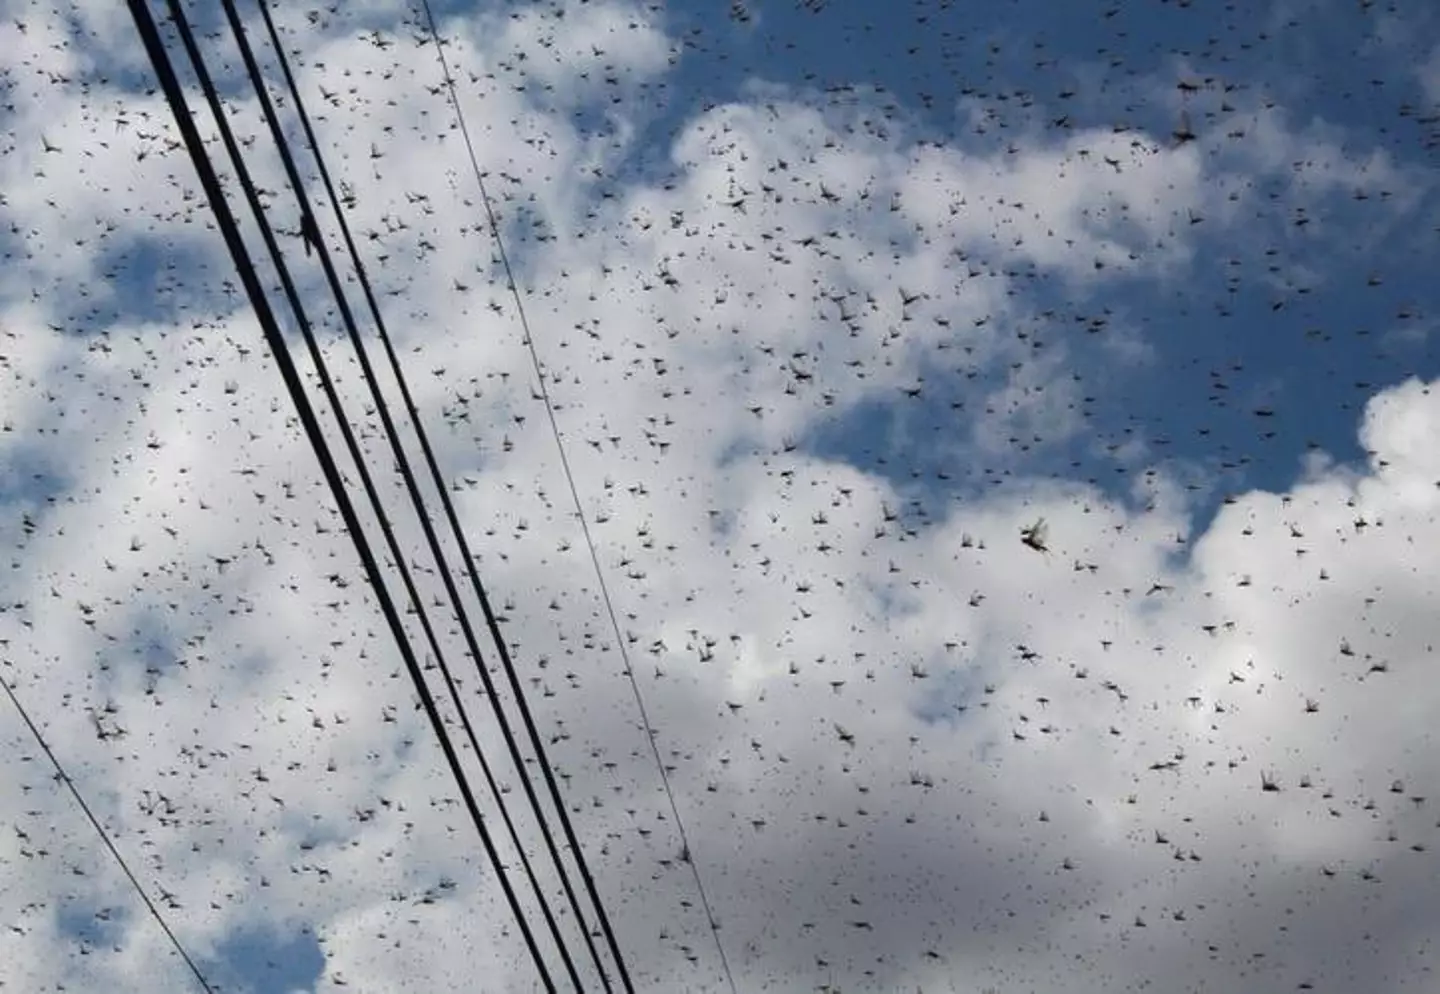 The insects have taken over the skies in Mexico.